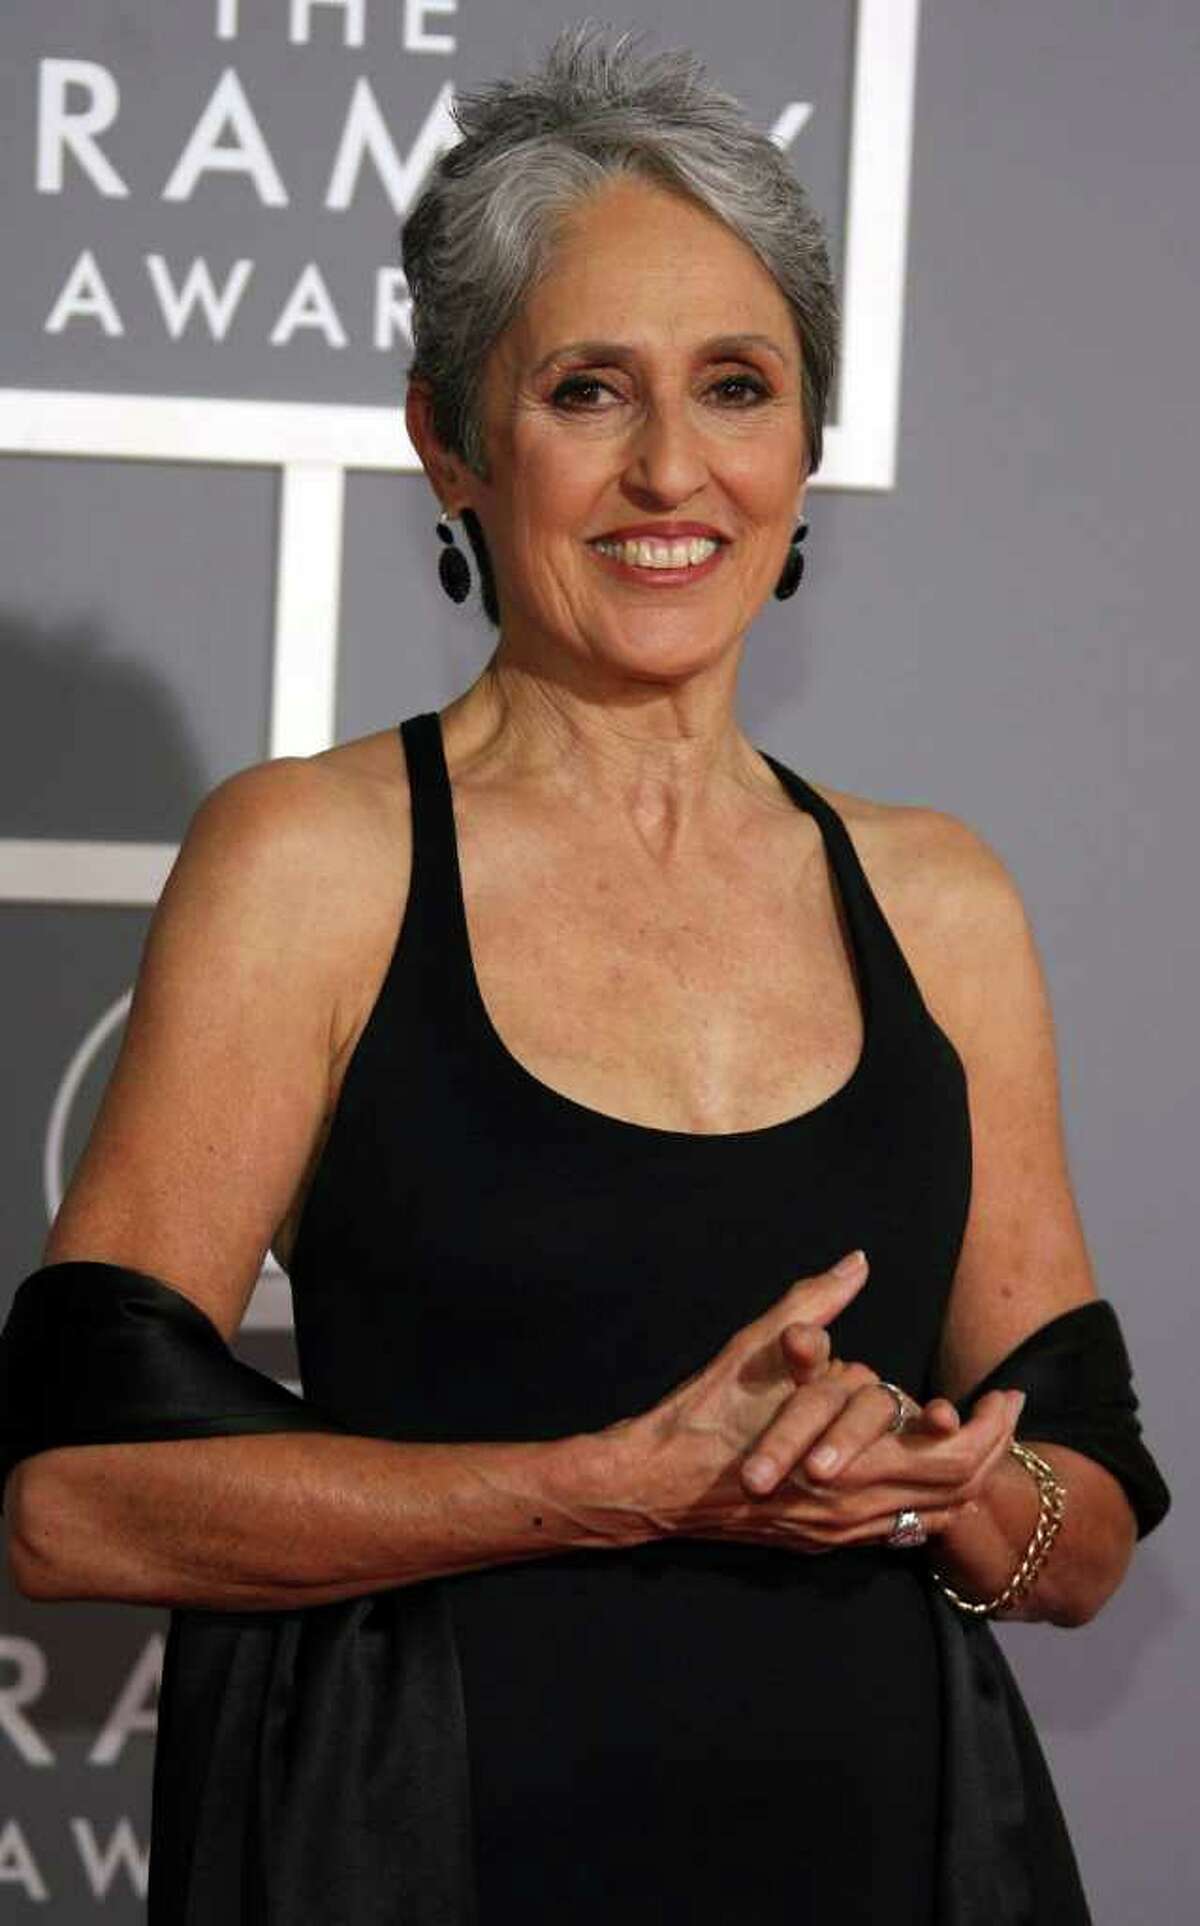 Musician Joan Baez arrives at the 49th Annual Grammy Awards at the Staples Center on Feb. 11, 2007, in Los Angeles. She will be performing in Stamford at the Palace Theatre, Tuesday, Nov. 15. (Frazer Harrison/Getty Images)